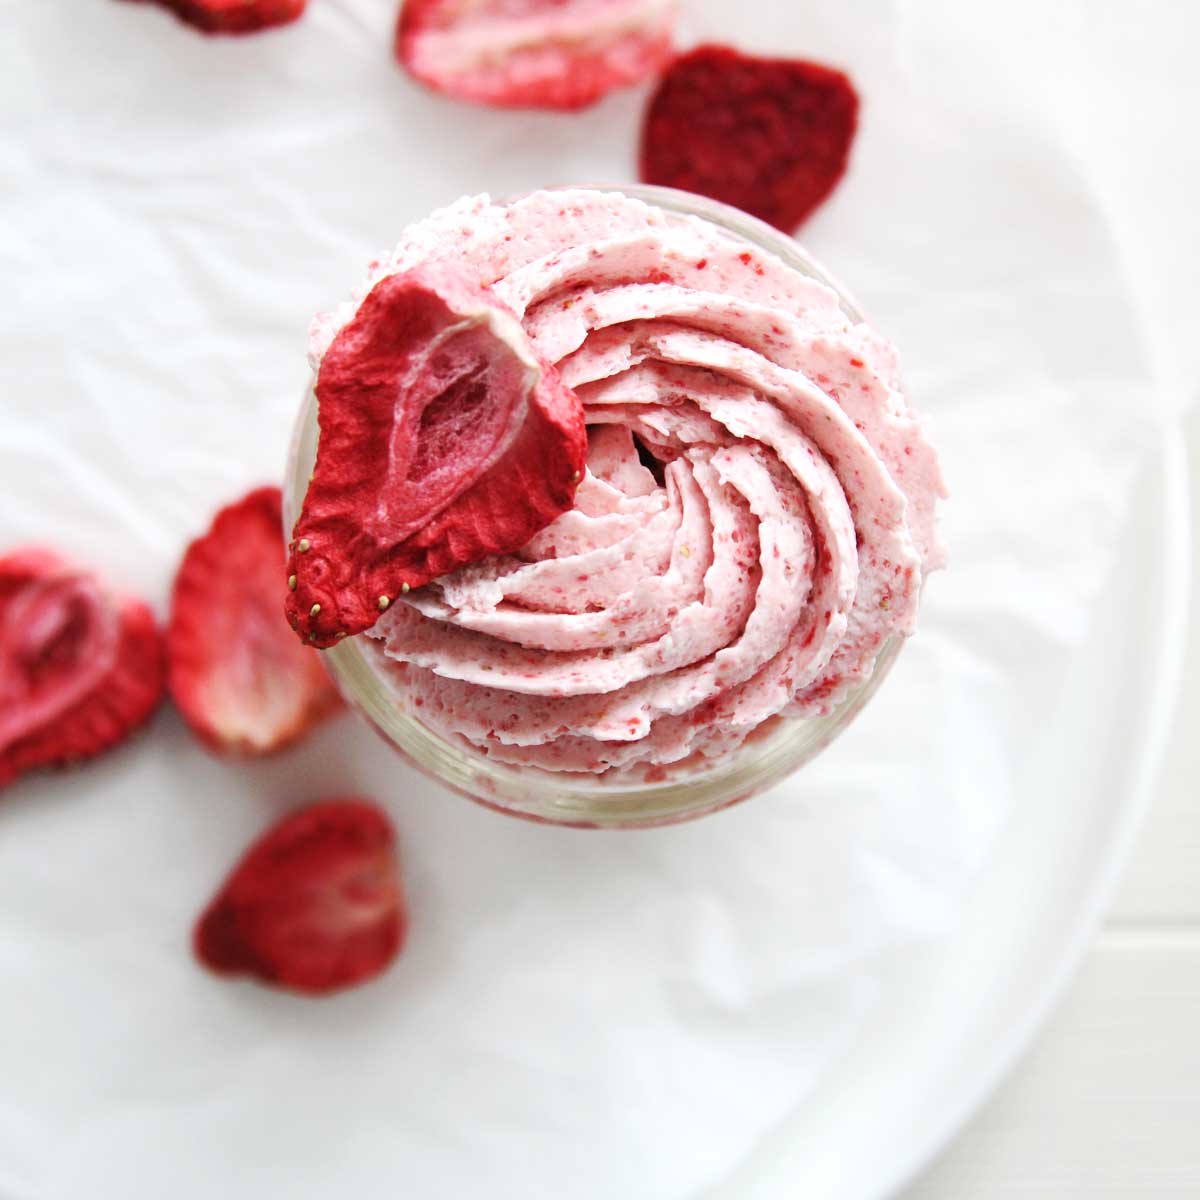 So Simple! Strawberry Whipped Cream (Chantilly Cream) Recipe - swiss roll